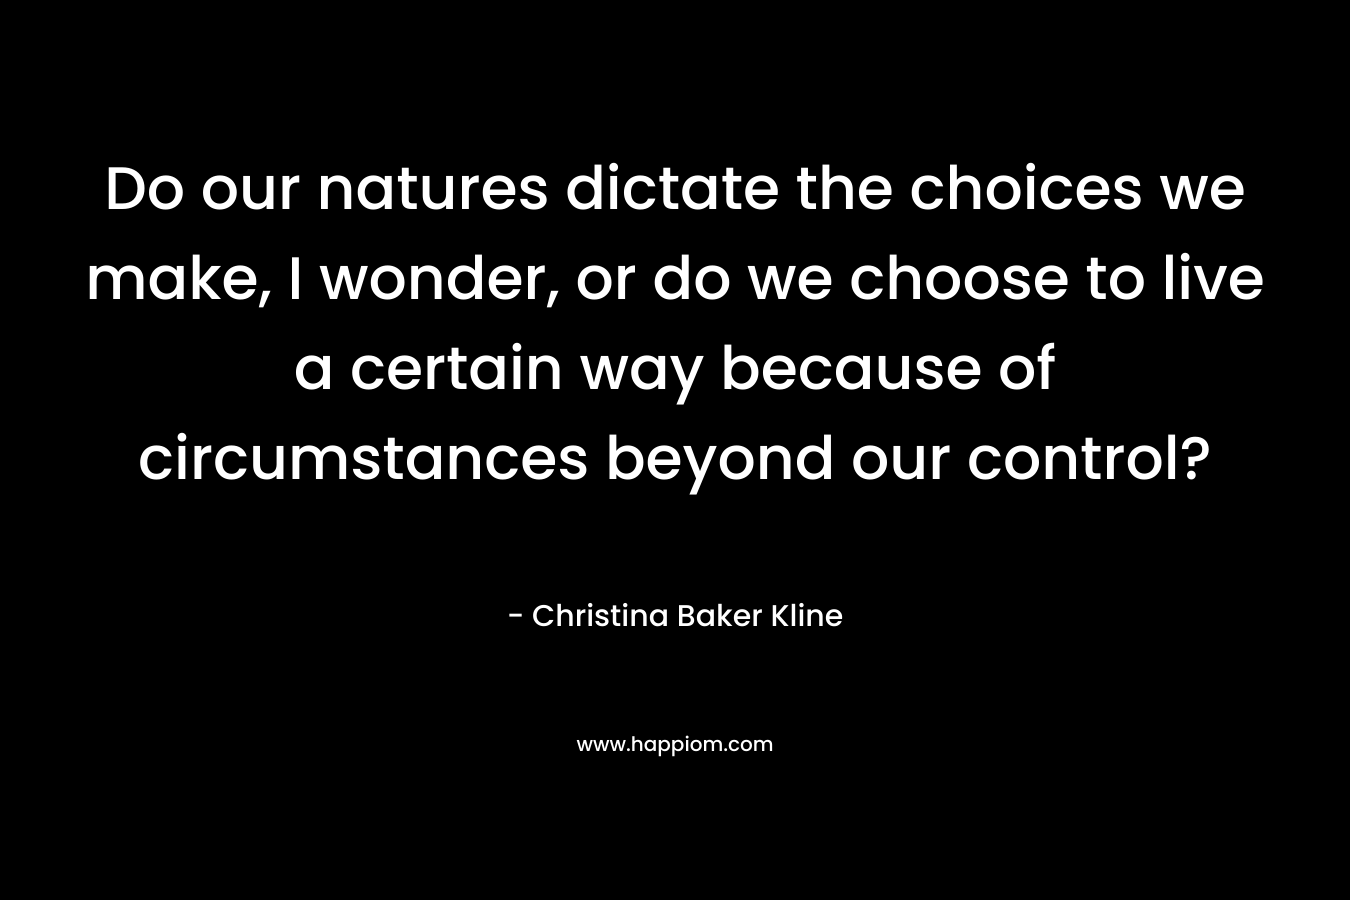 Do our natures dictate the choices we make, I wonder, or do we choose to live a certain way because of circumstances beyond our control? – Christina Baker Kline